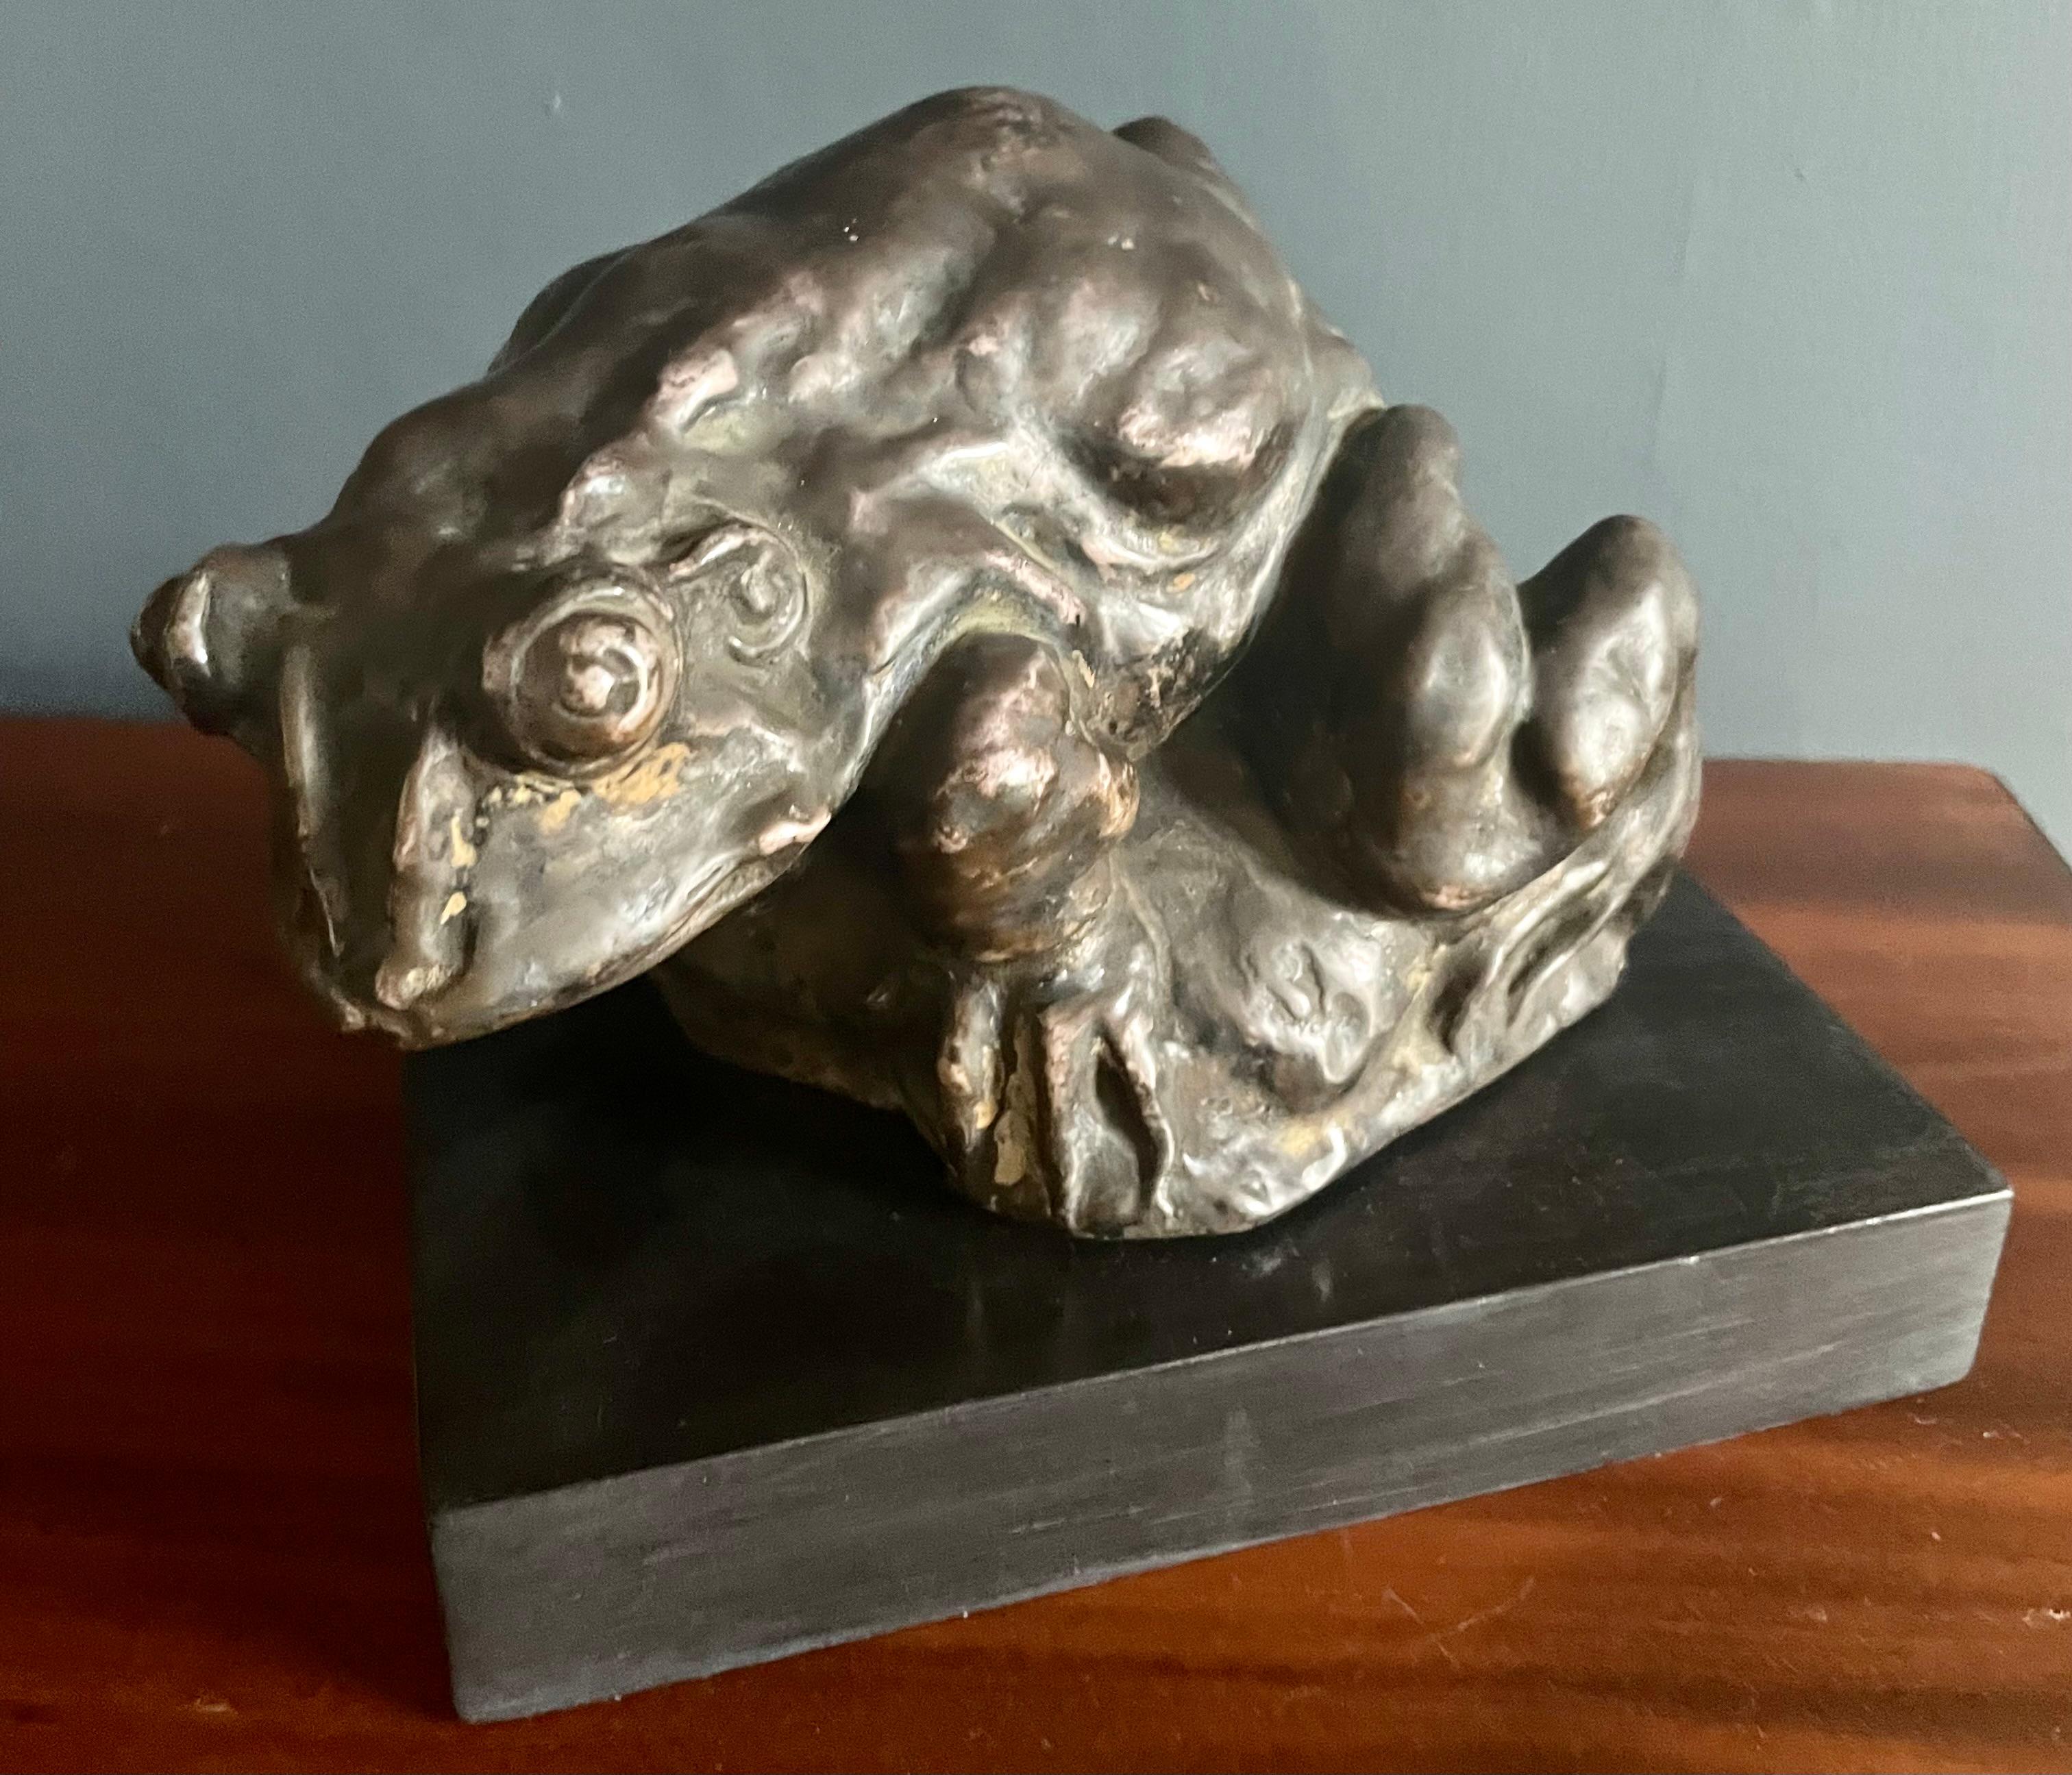 Silvered bronze frog sculpture. Antique glazed Italian terracotta silvered bronze naturalistic frog statue on ebonized wood base. Italy, early 19th century

Dimensions: 7.5